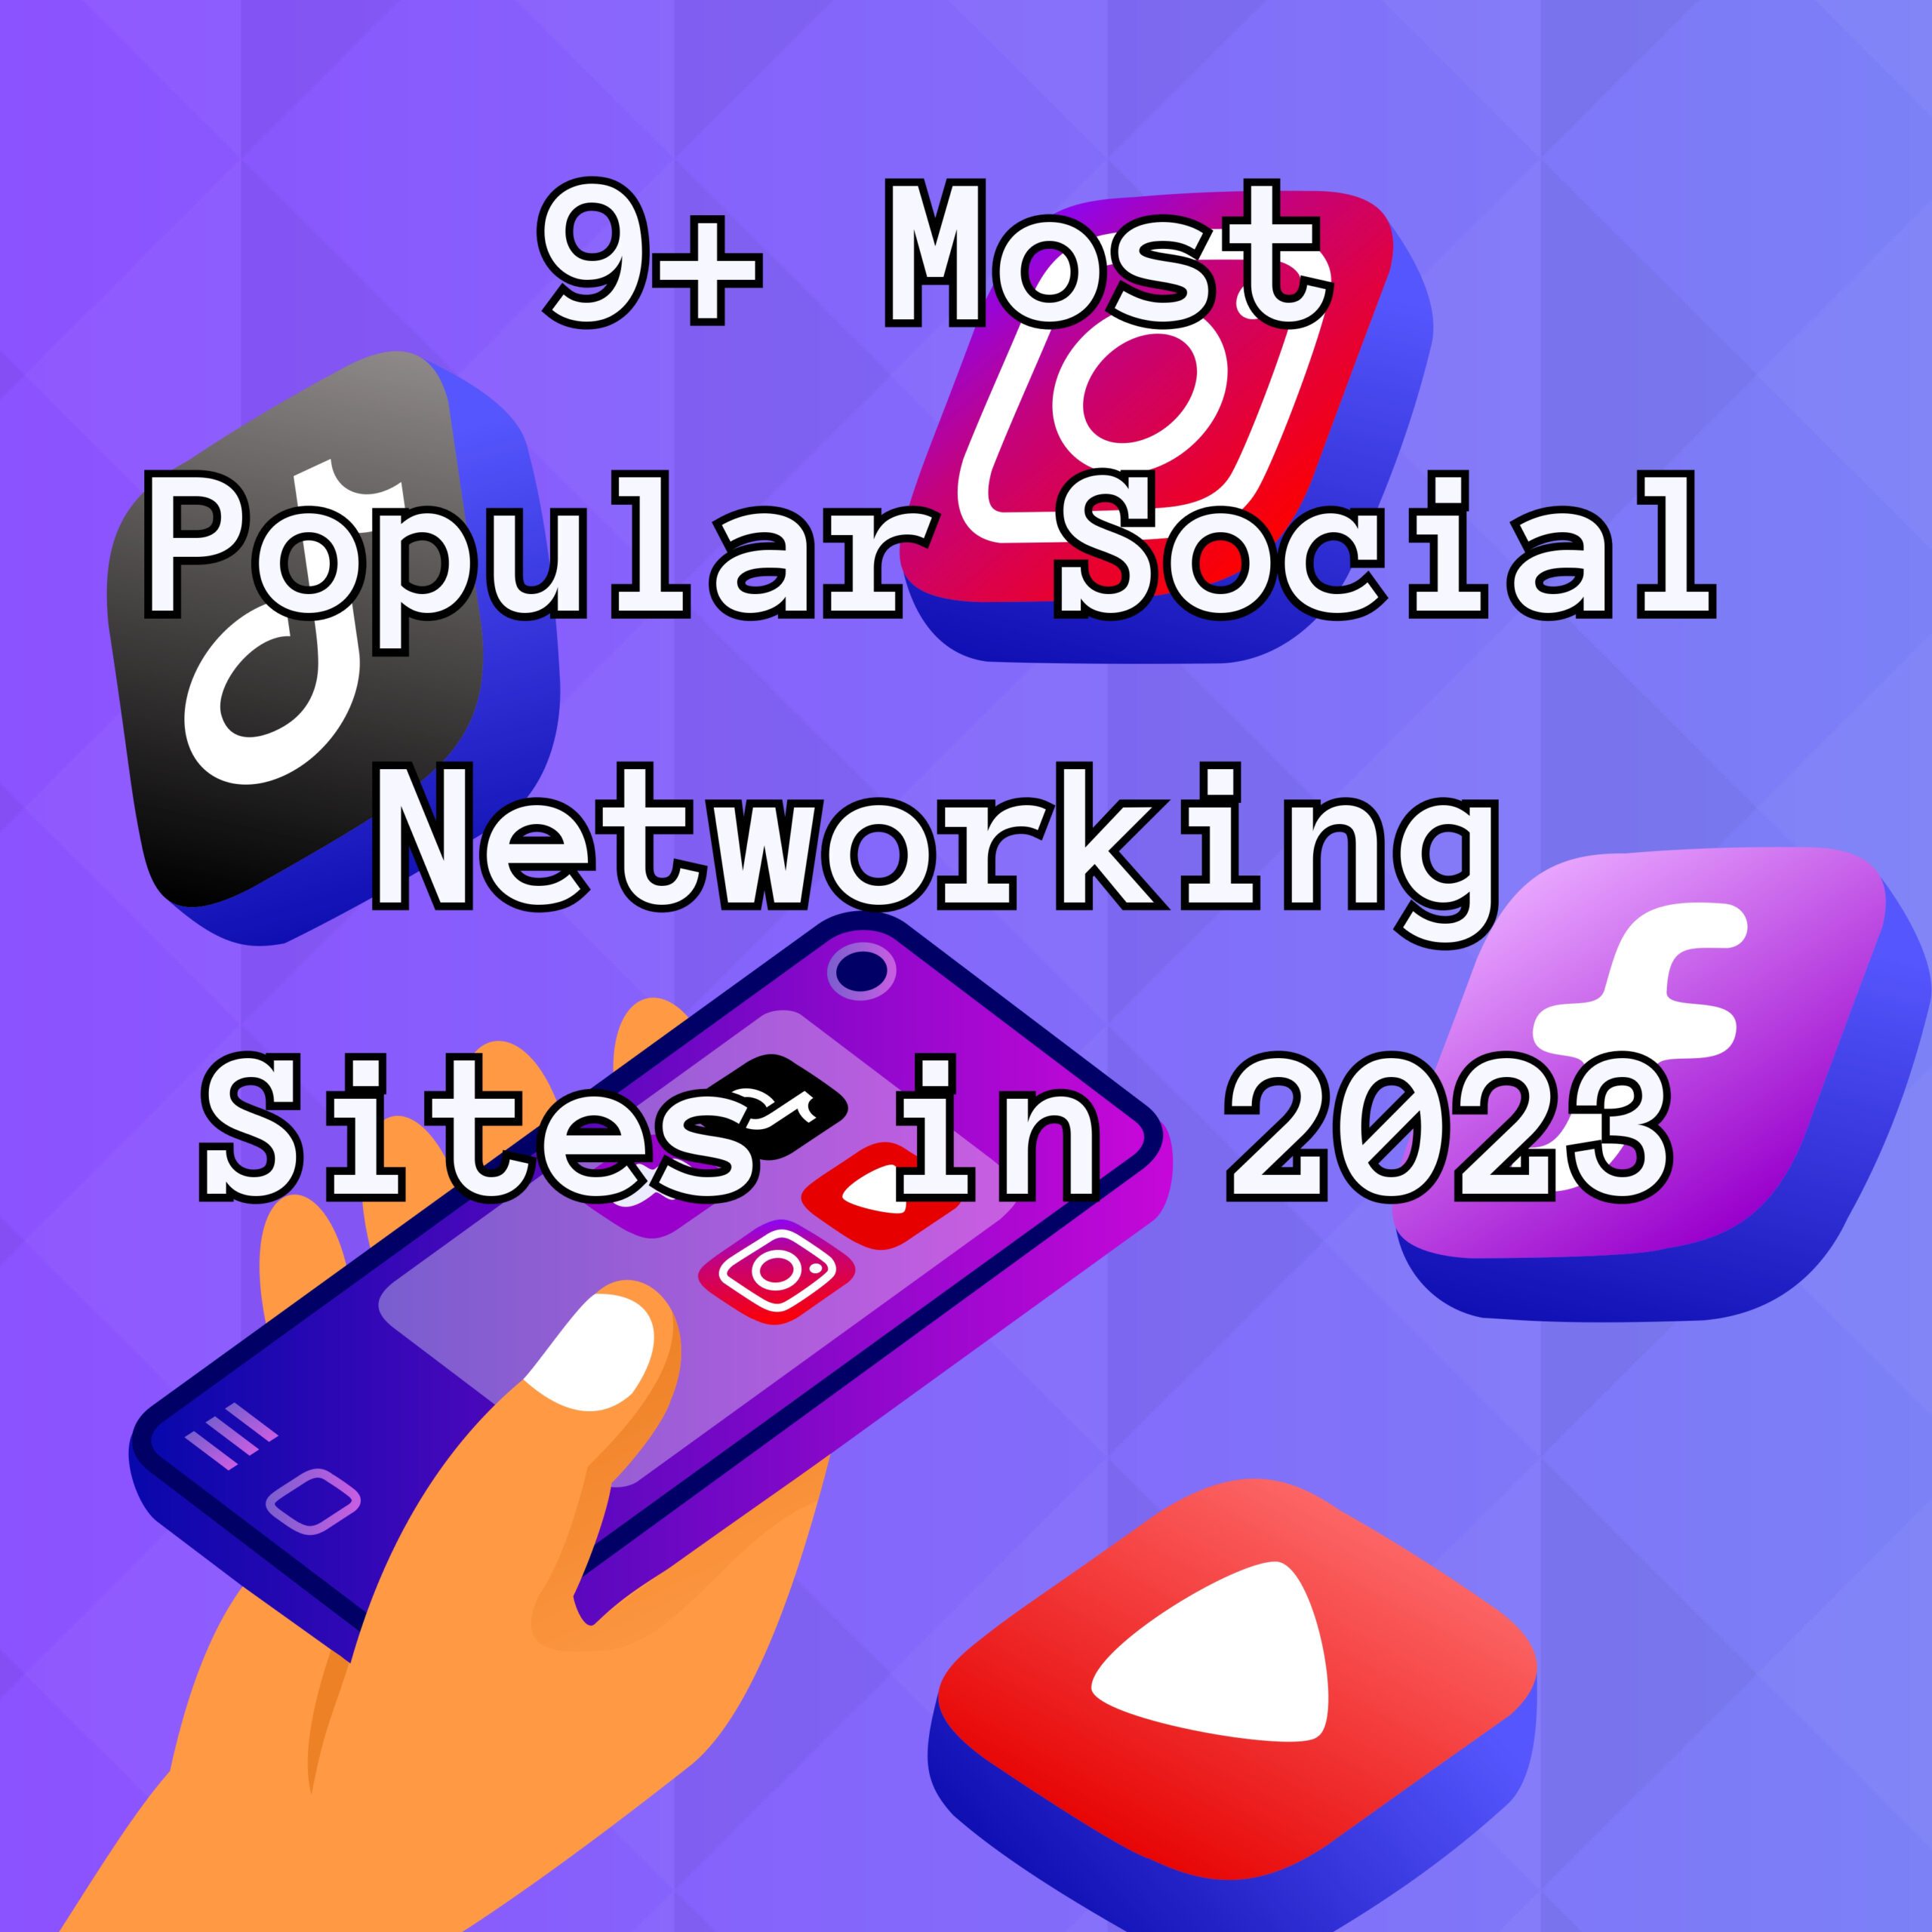 9+ Most Popular Social Networking Sites in 2023